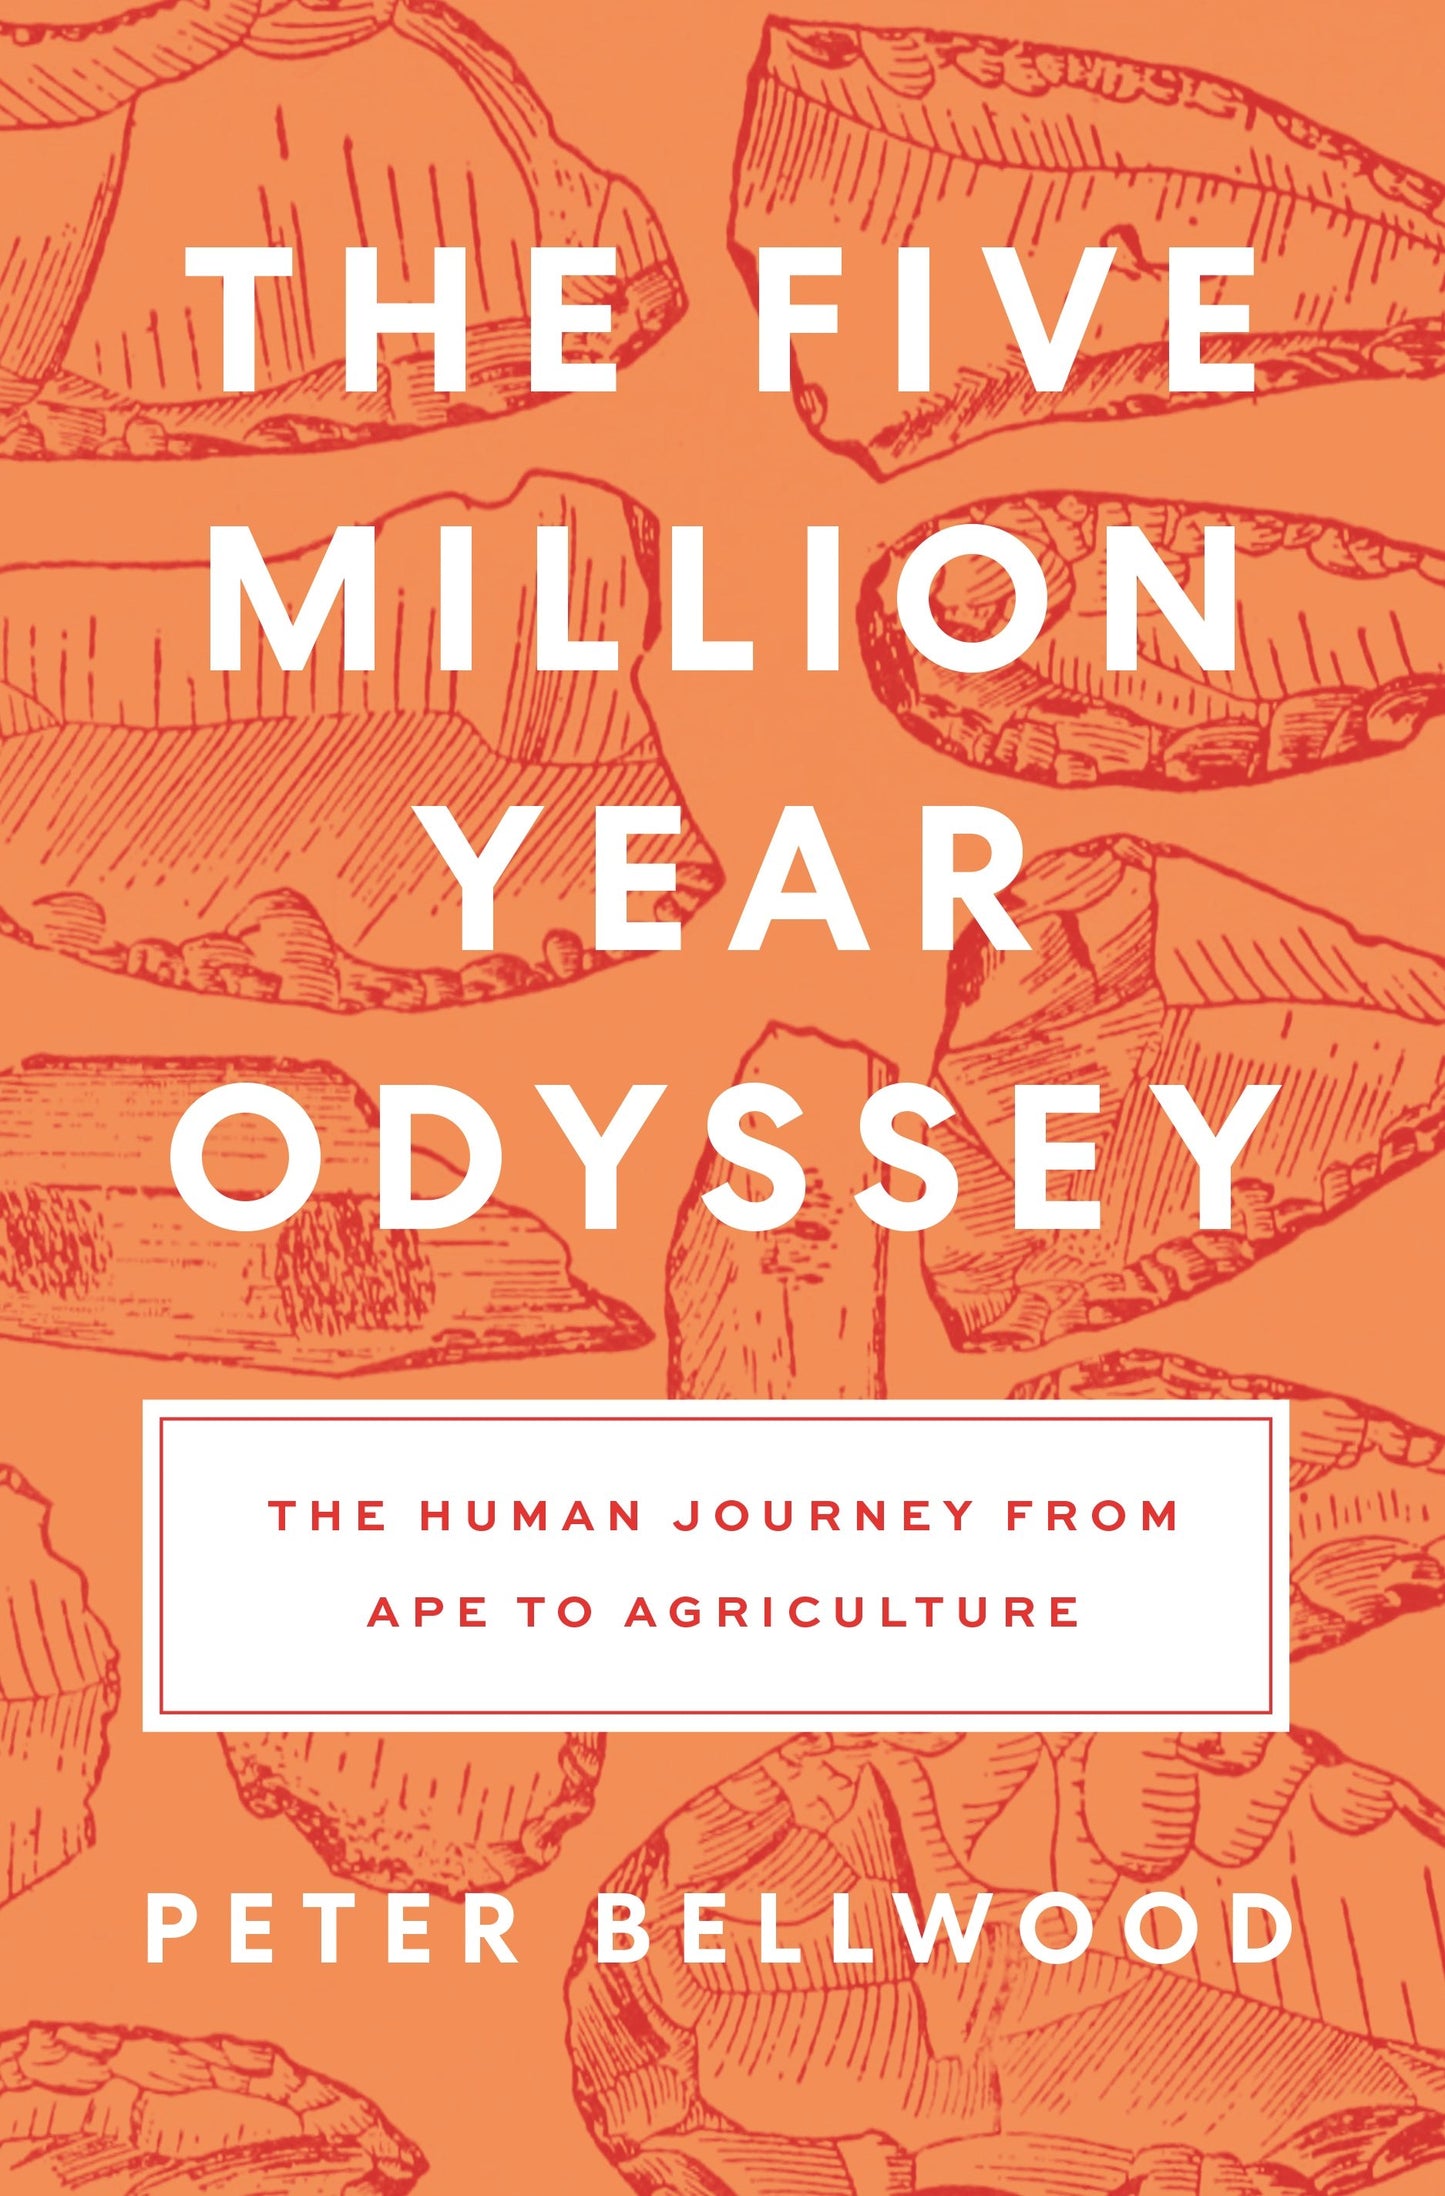 The Five Million Year Odyssey -	Peter Bellwood